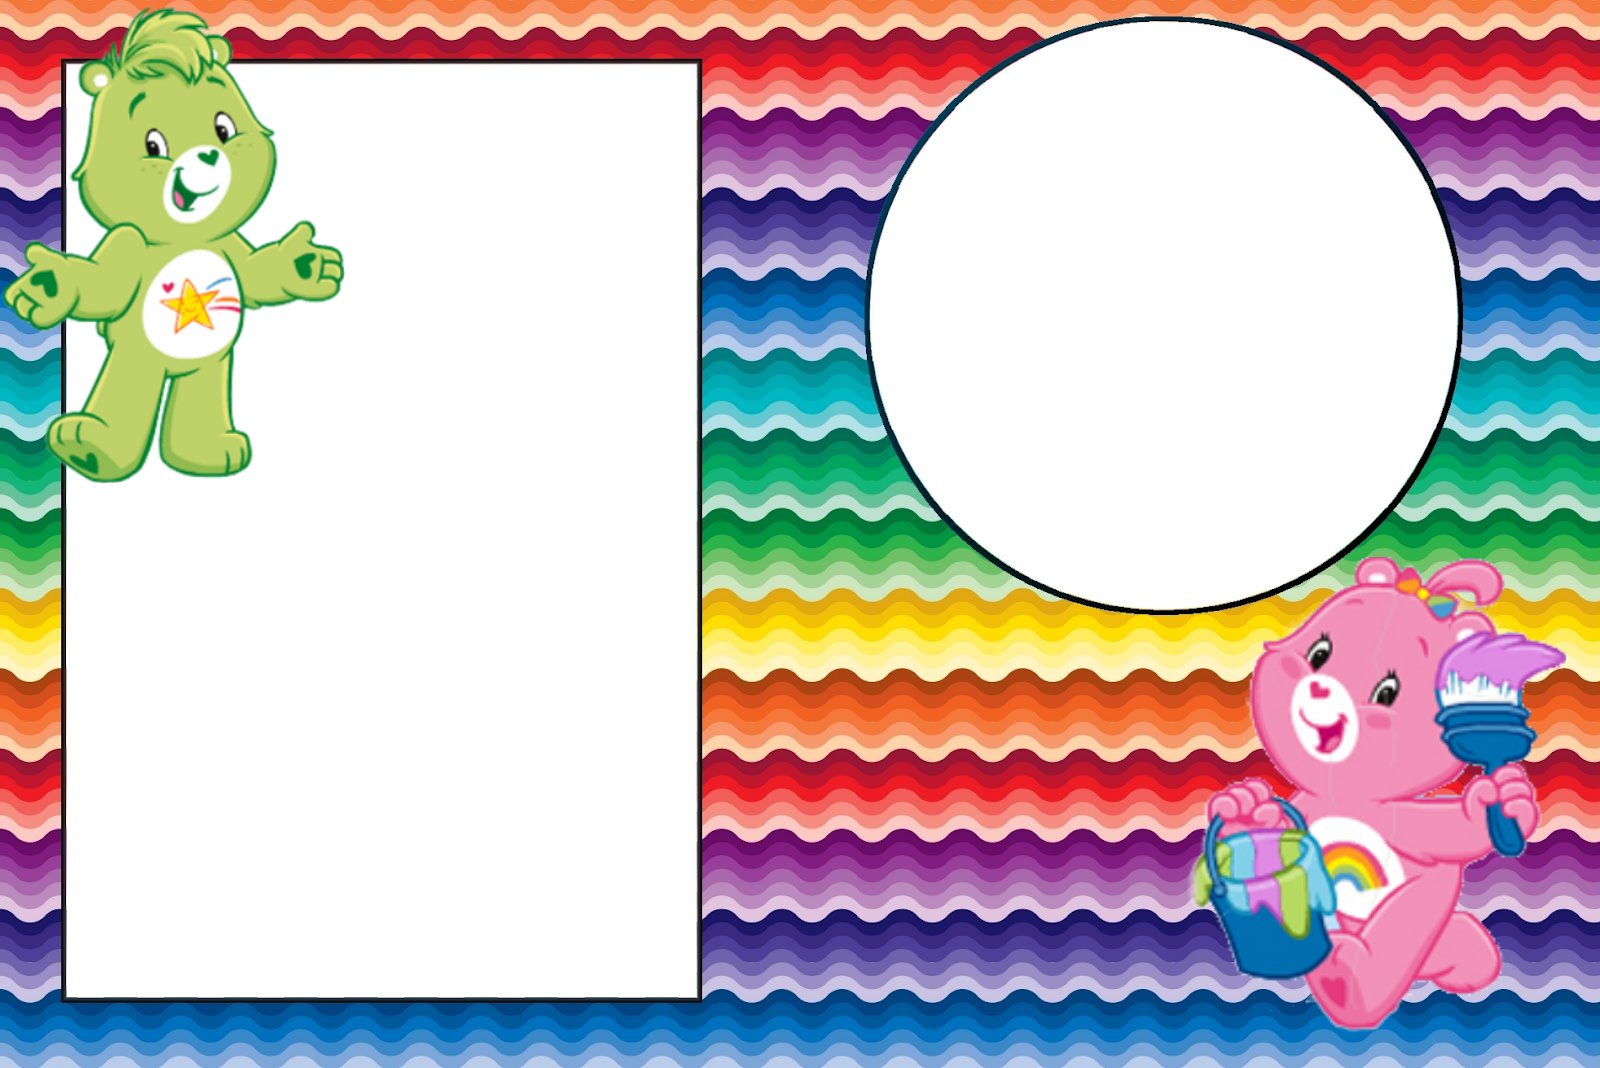 care-bears-with-rainbow-free-printable-invitations-oh-my-fiesta-in-english